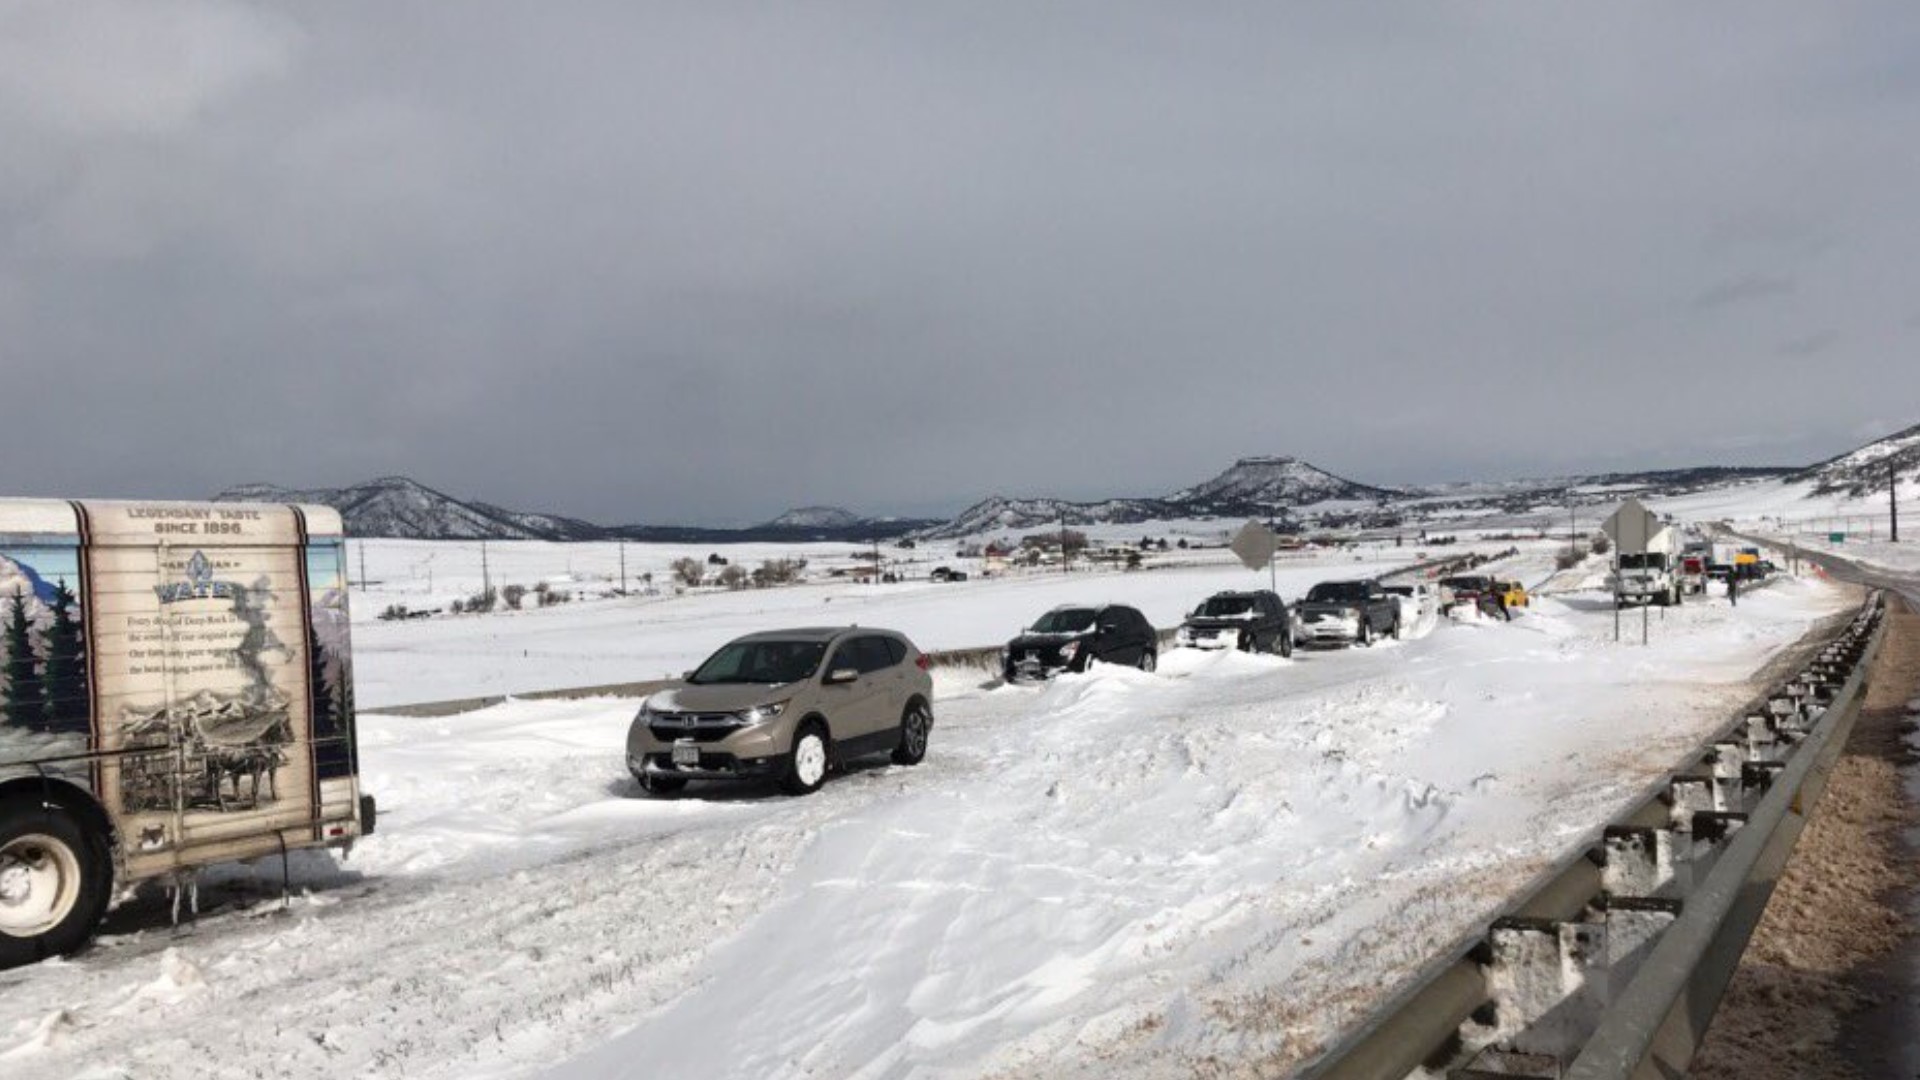 One driver was on his way home from work in Denver to Colorado Springs when he became stuck near Elizabeth. He was rescued Wednesday afternoon and spent the night in a shelter.